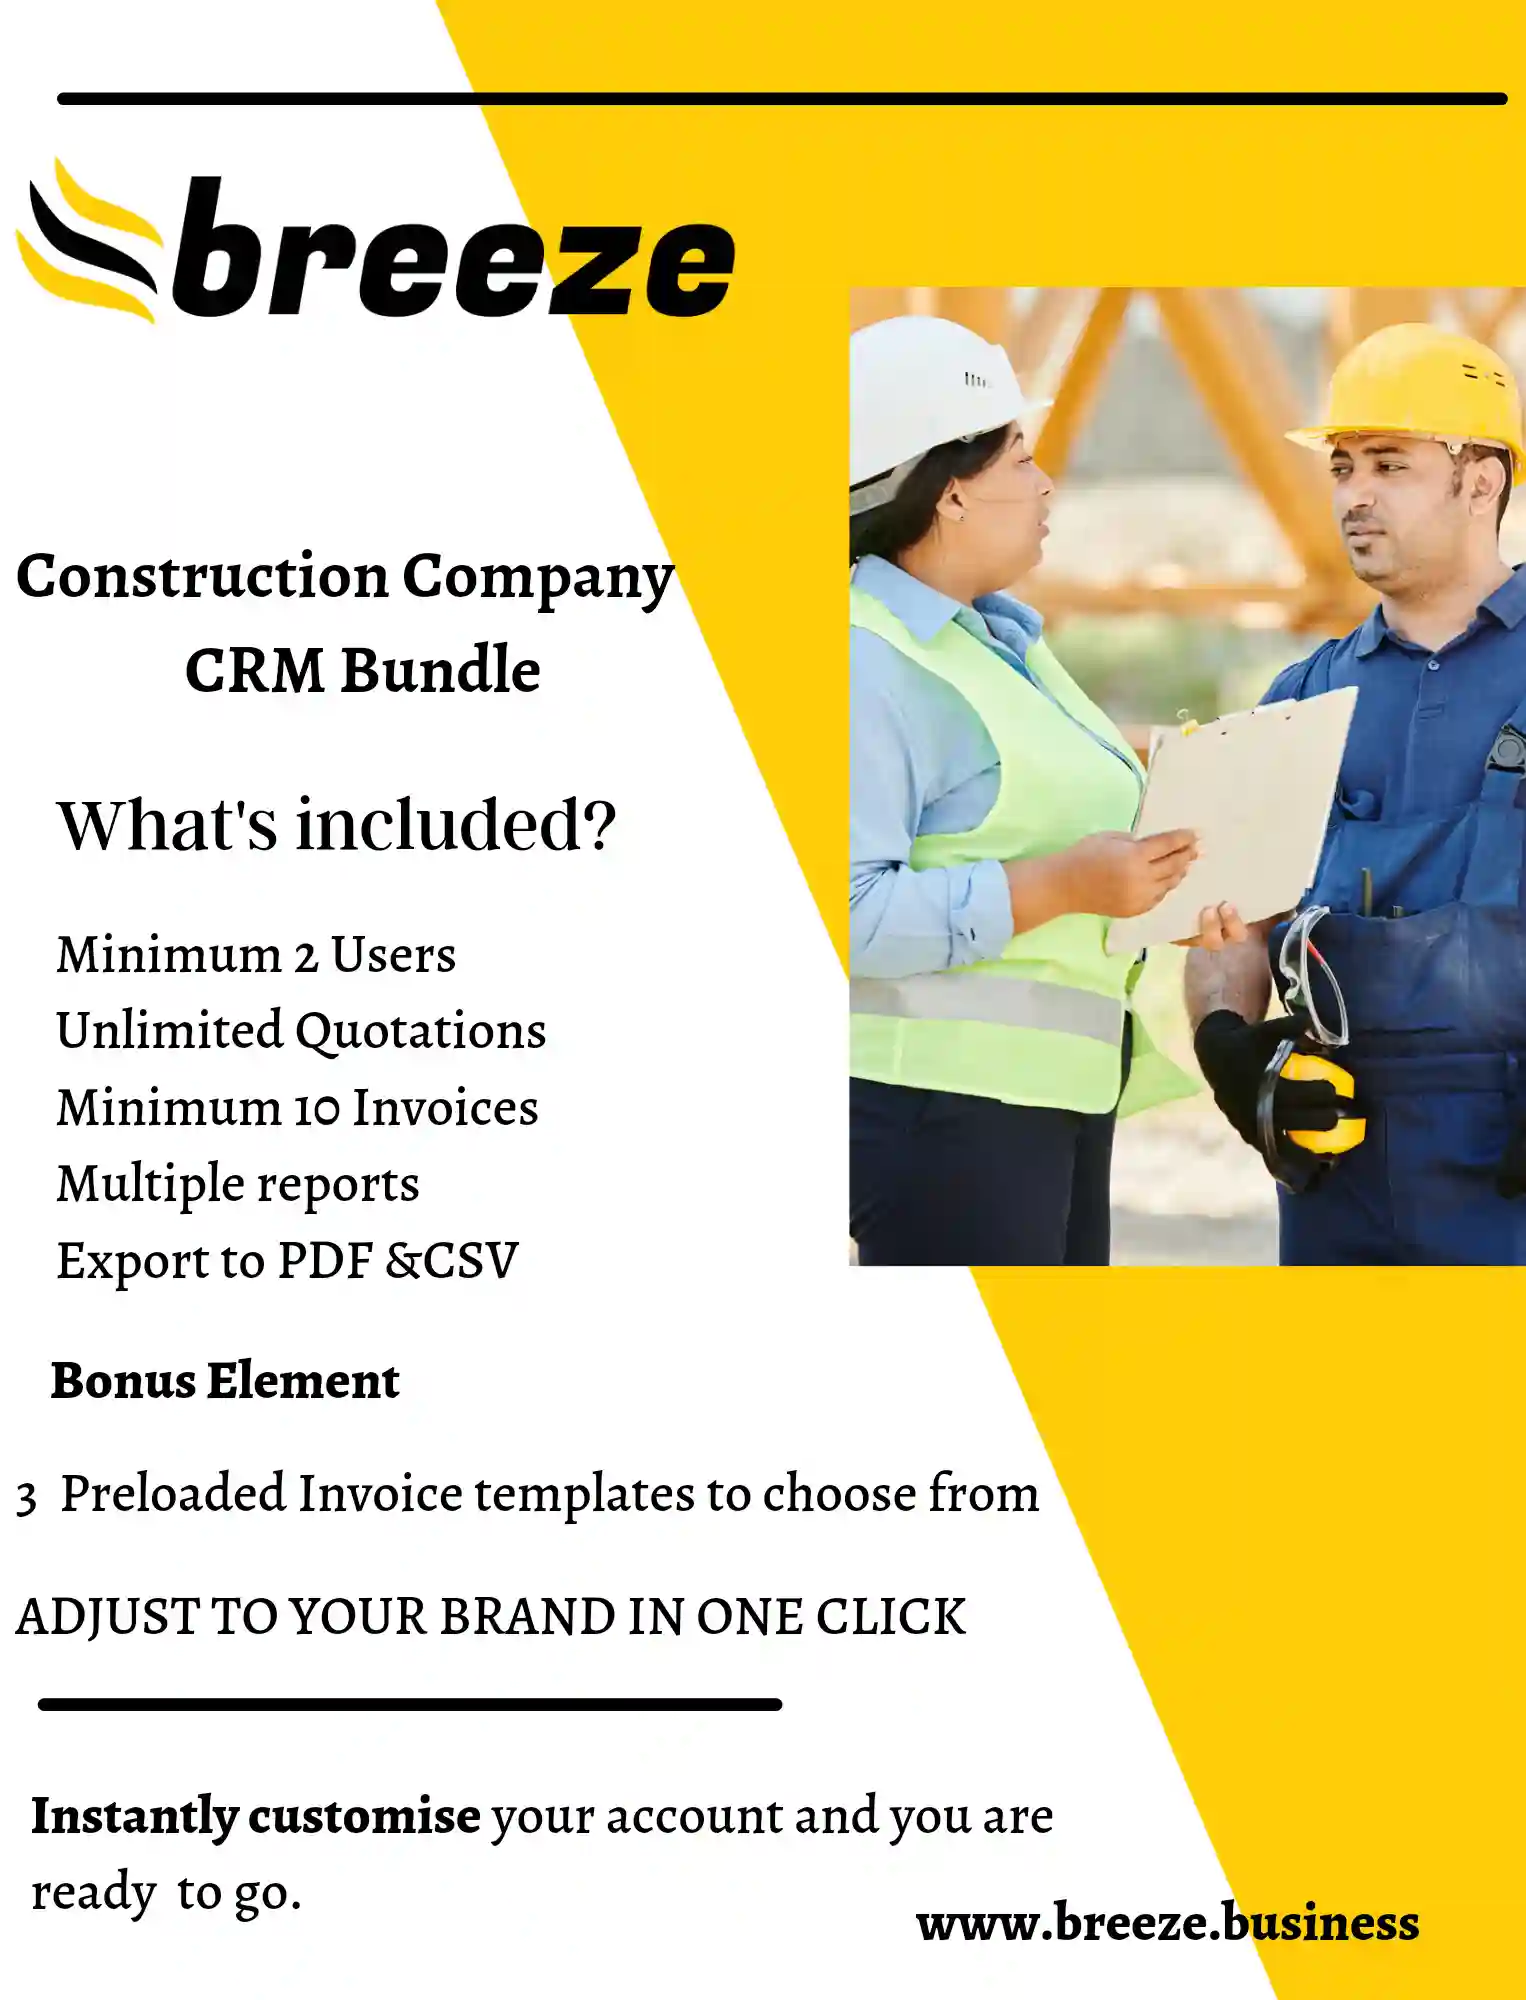 Breeze Customer Relationship Management Software for the Construction Industry